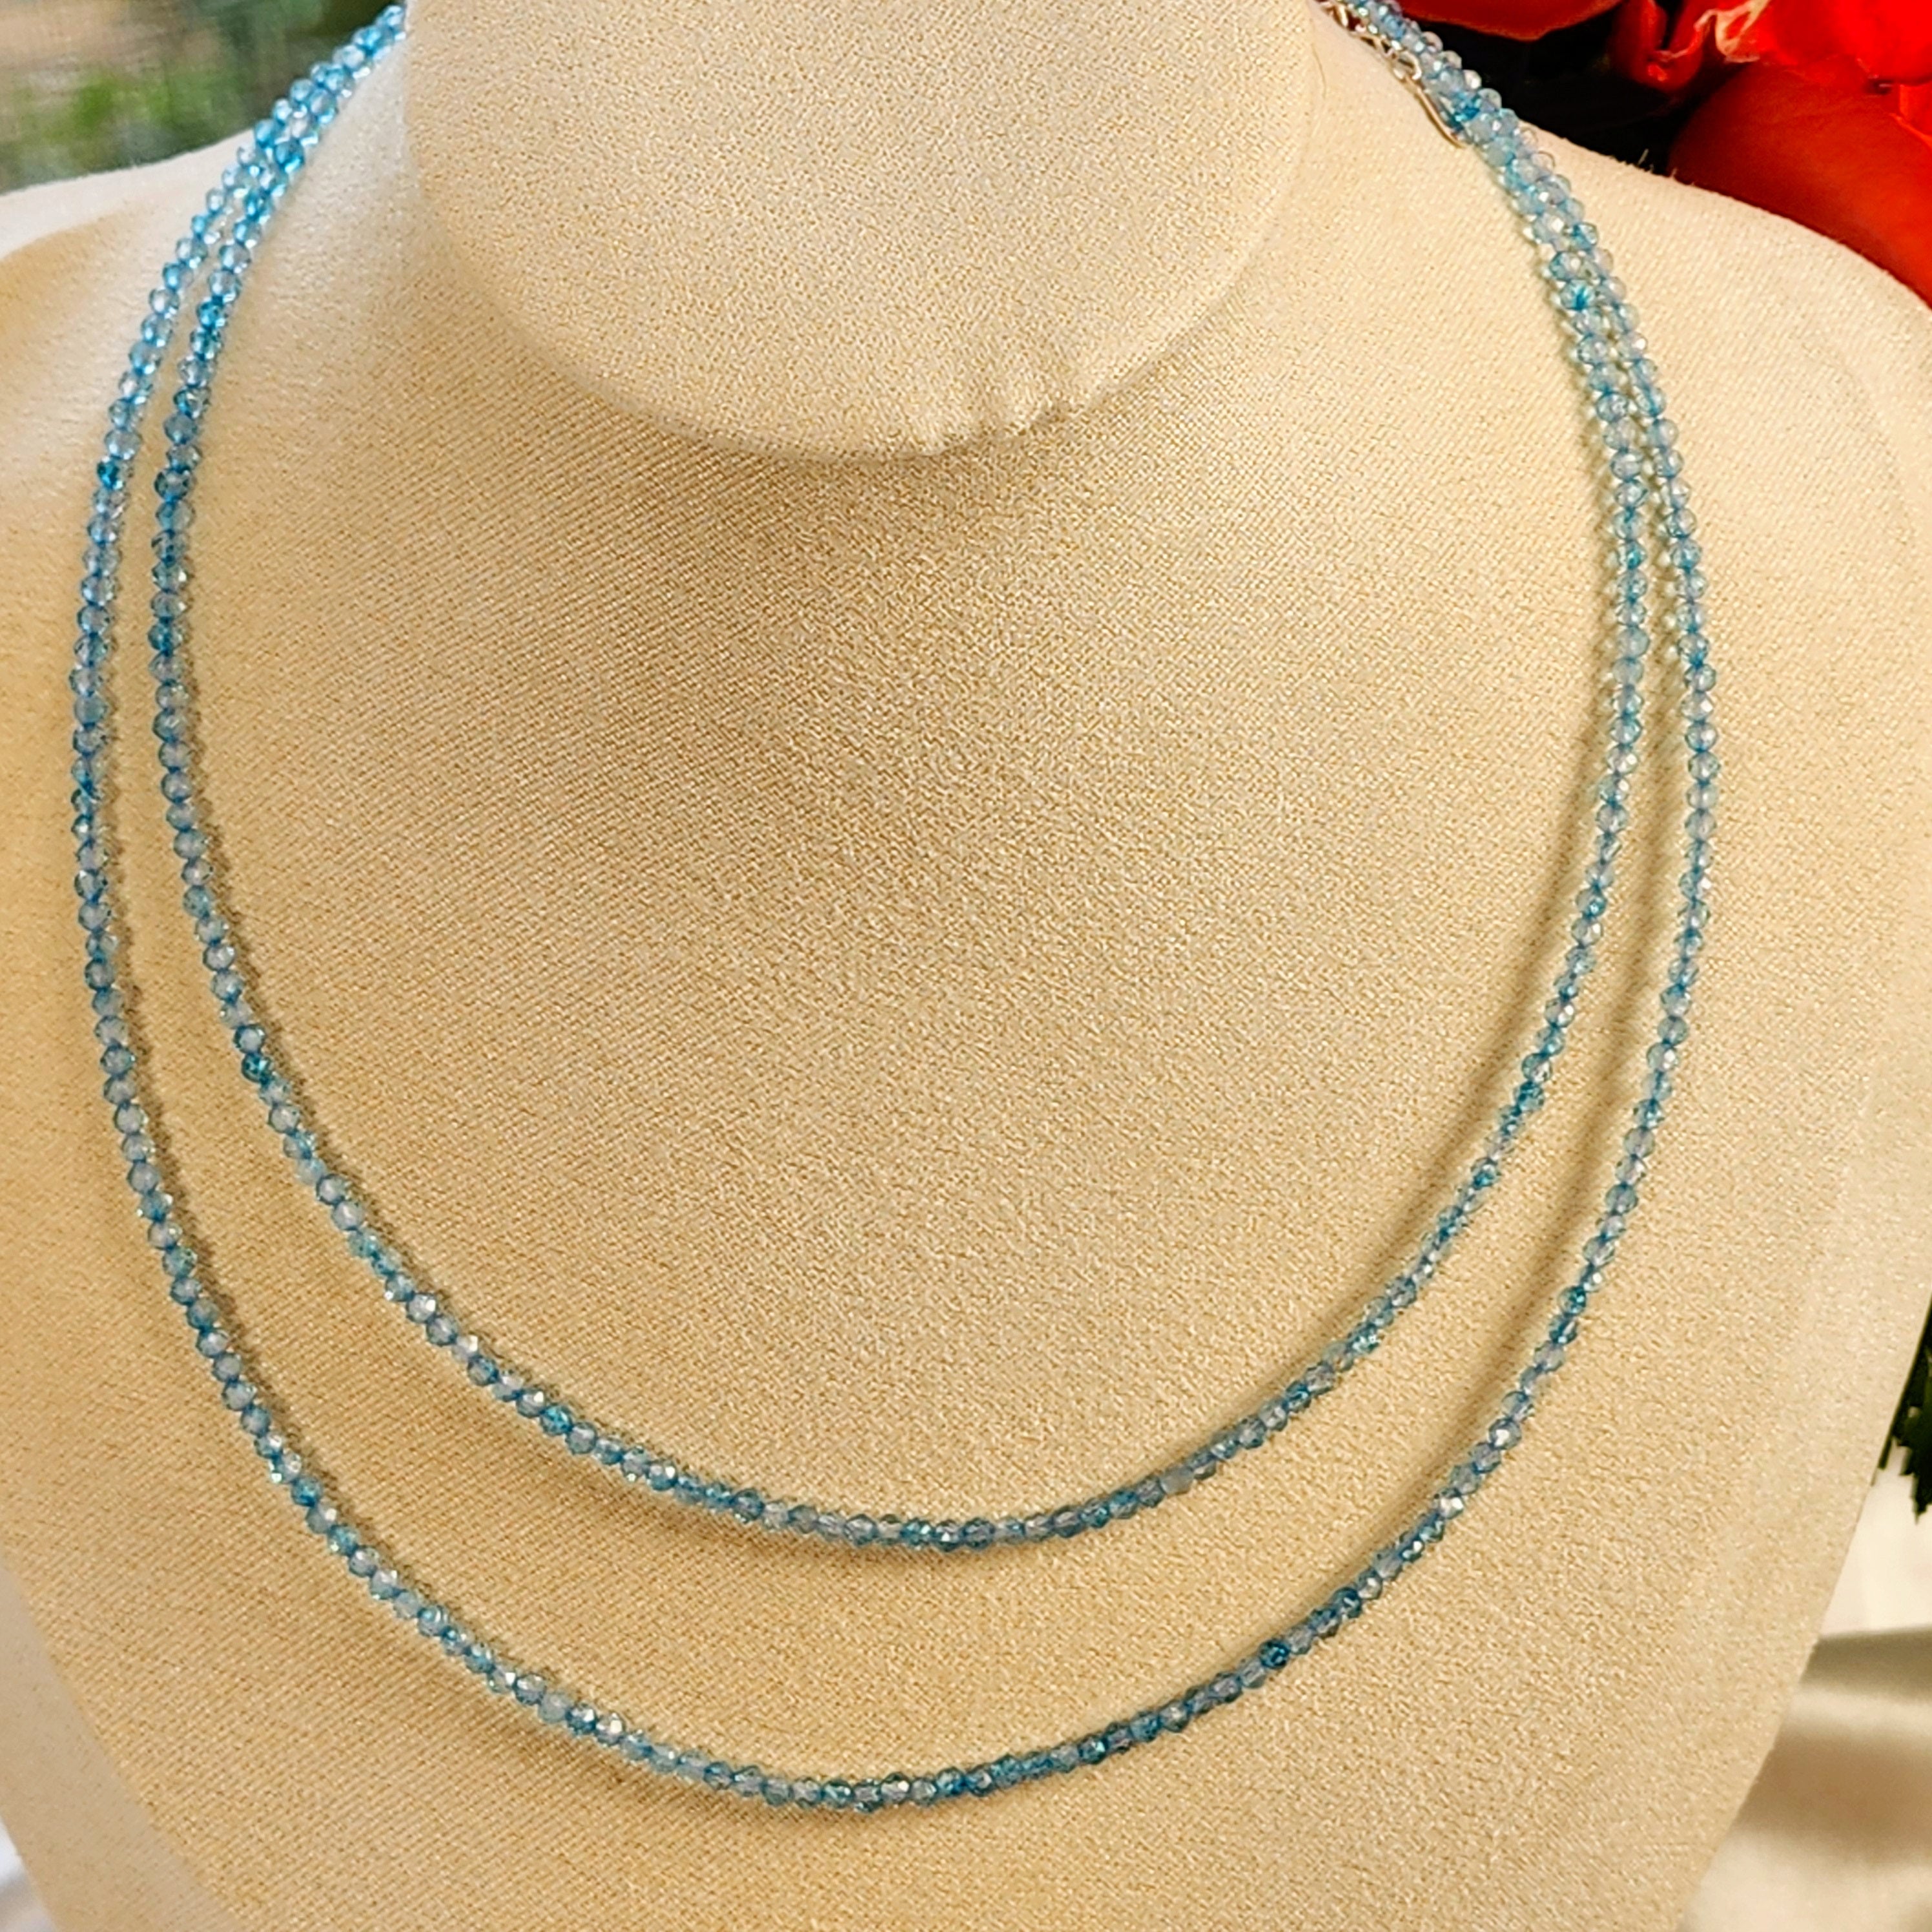 Blue Topaz Micro Faceted Choker/Layering Necklace for Mental Clarity and Wisdom